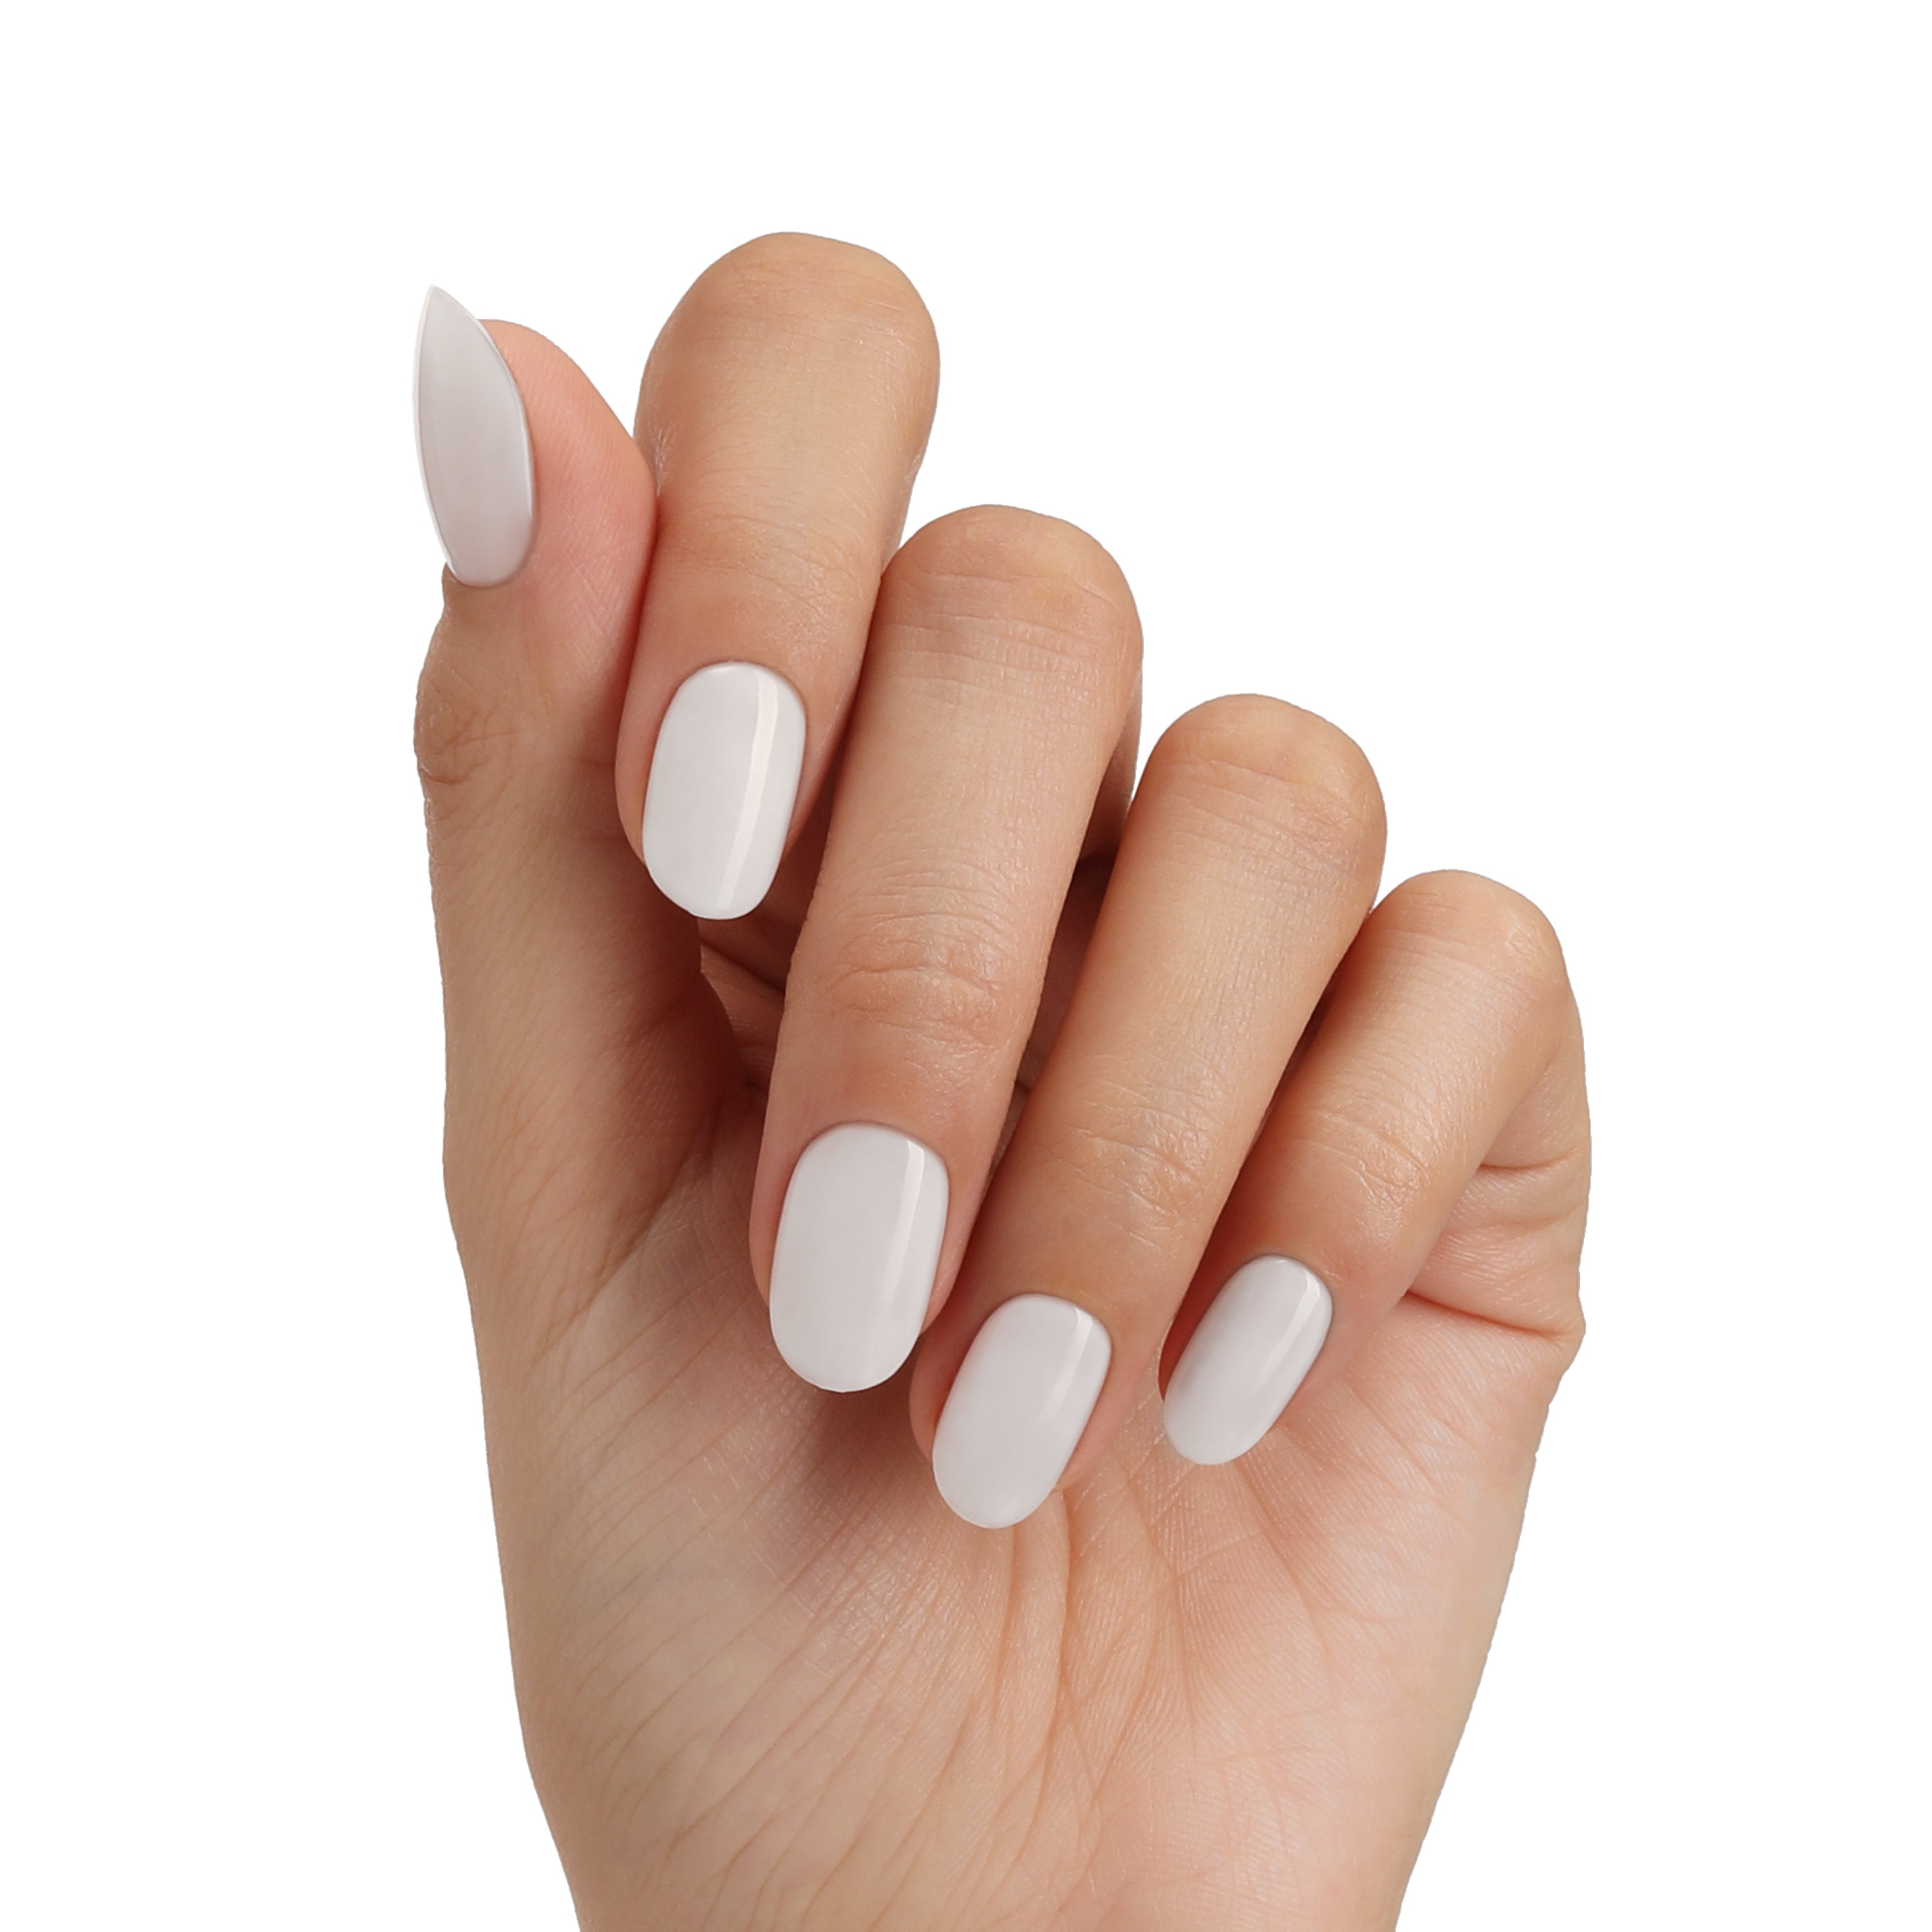 Milky White Nails Are the Trend You Were Waiting For - L'Oréal Paris